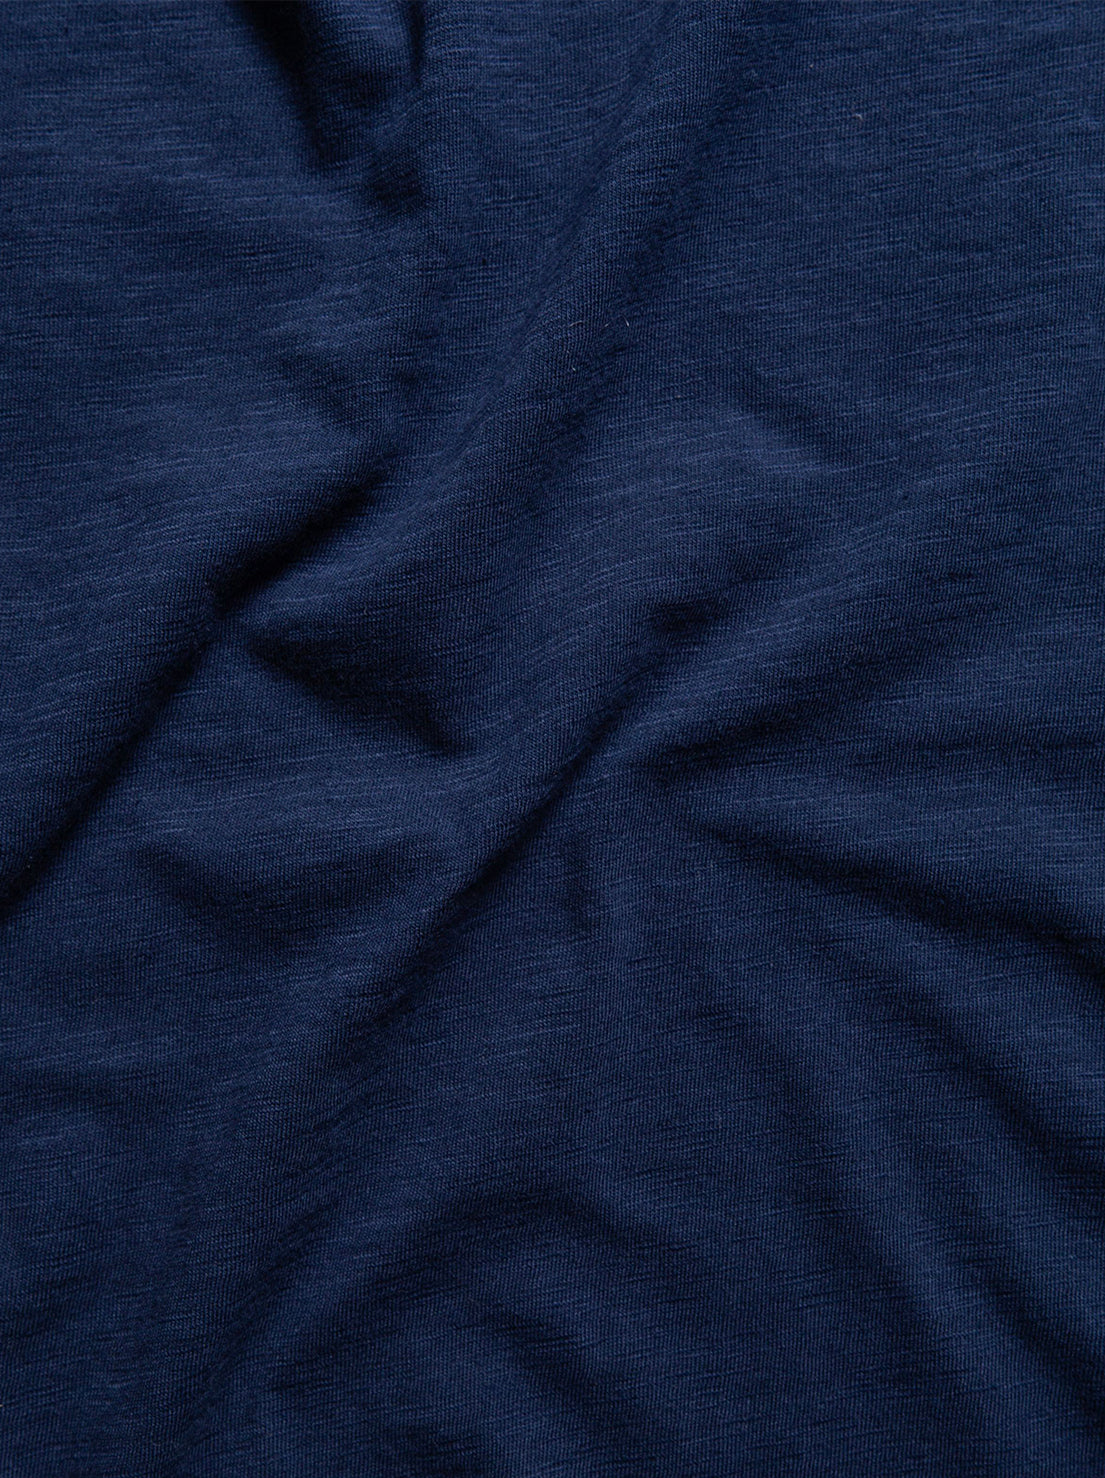 Nudie - Roffe T-Shirt - French Blue